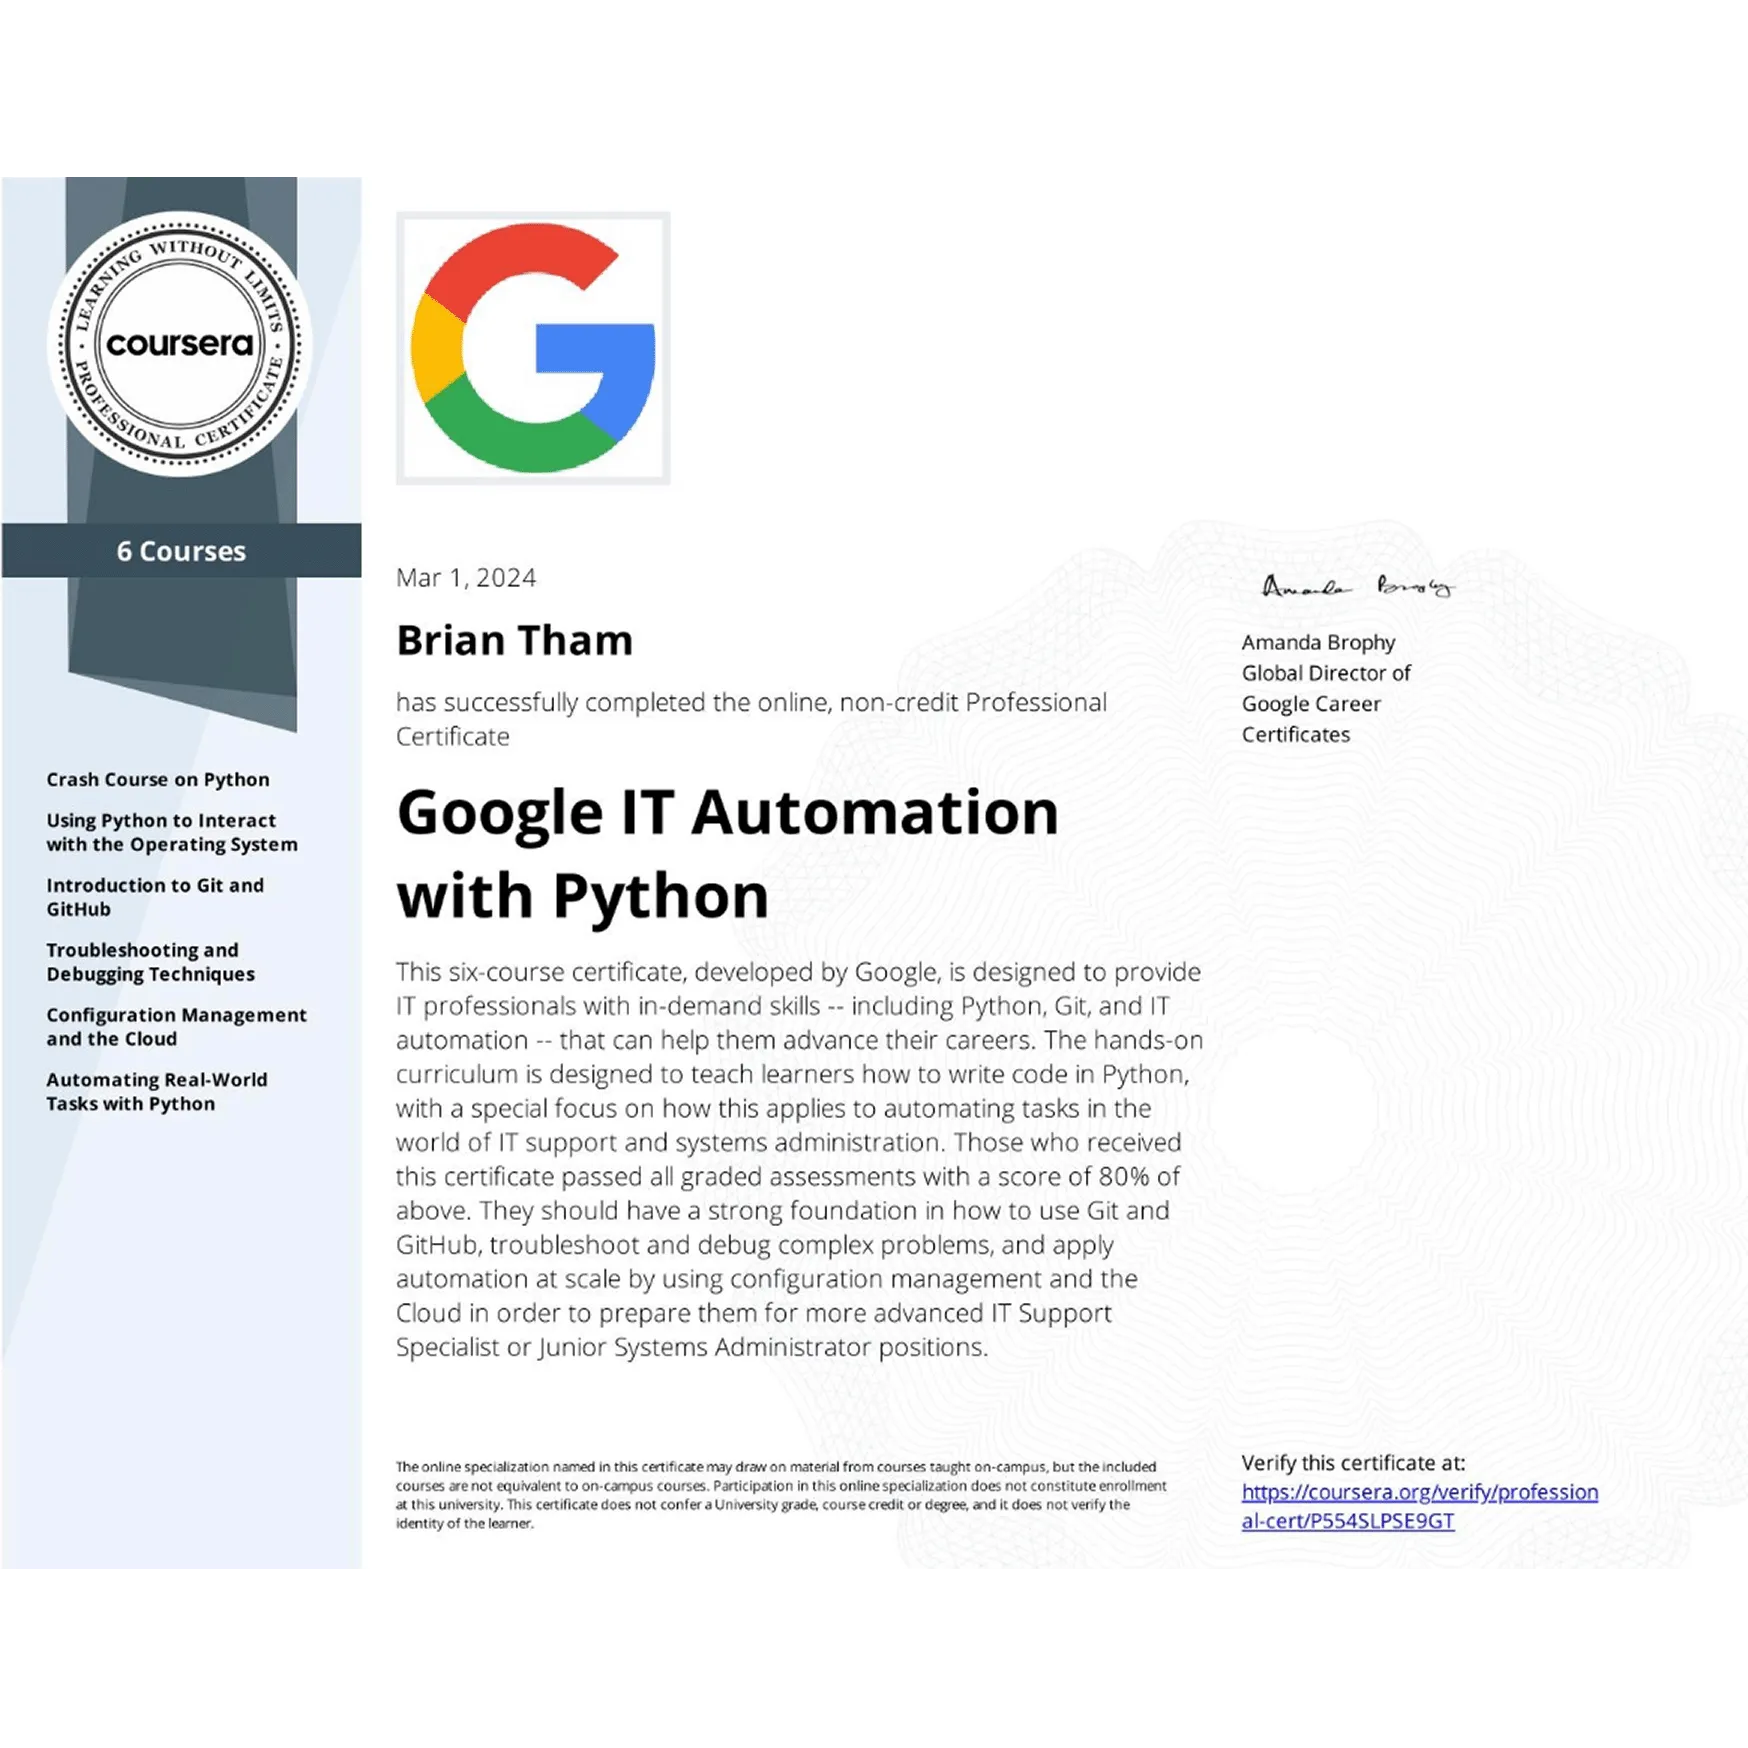 Google IT Automation with Python certificate awarded to Brian Tham